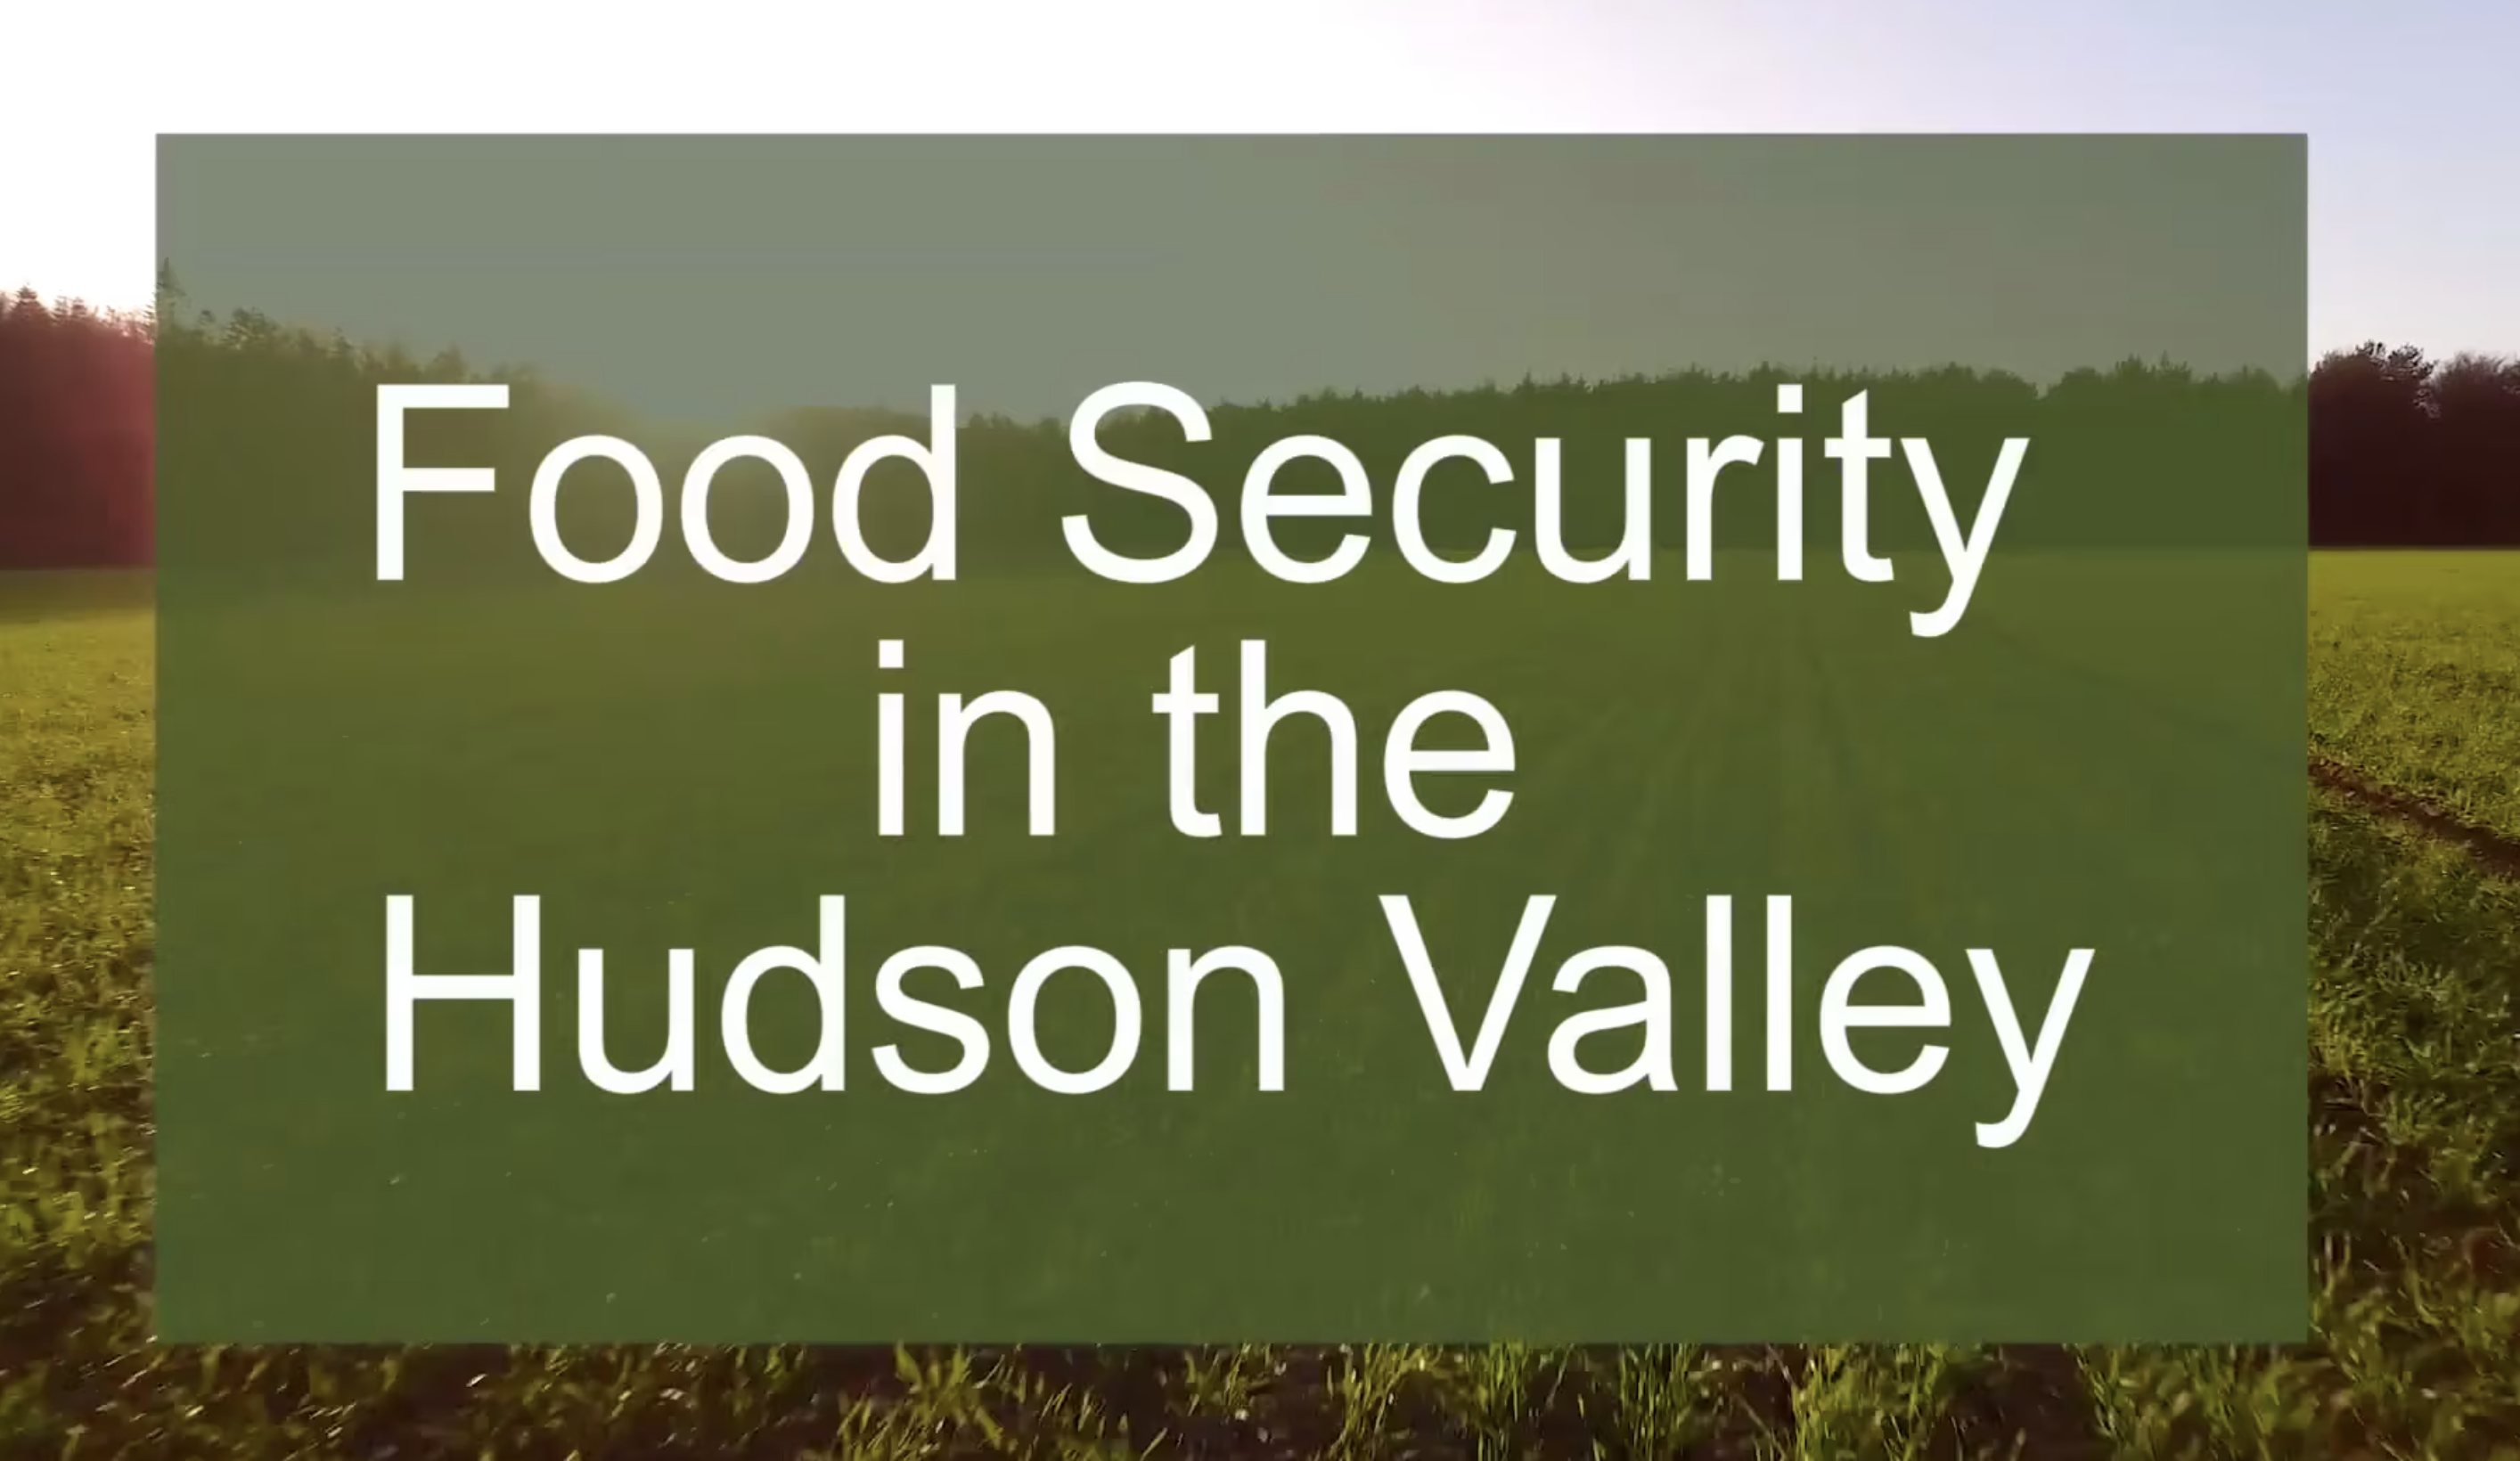 Food Security in the Hudson Valley